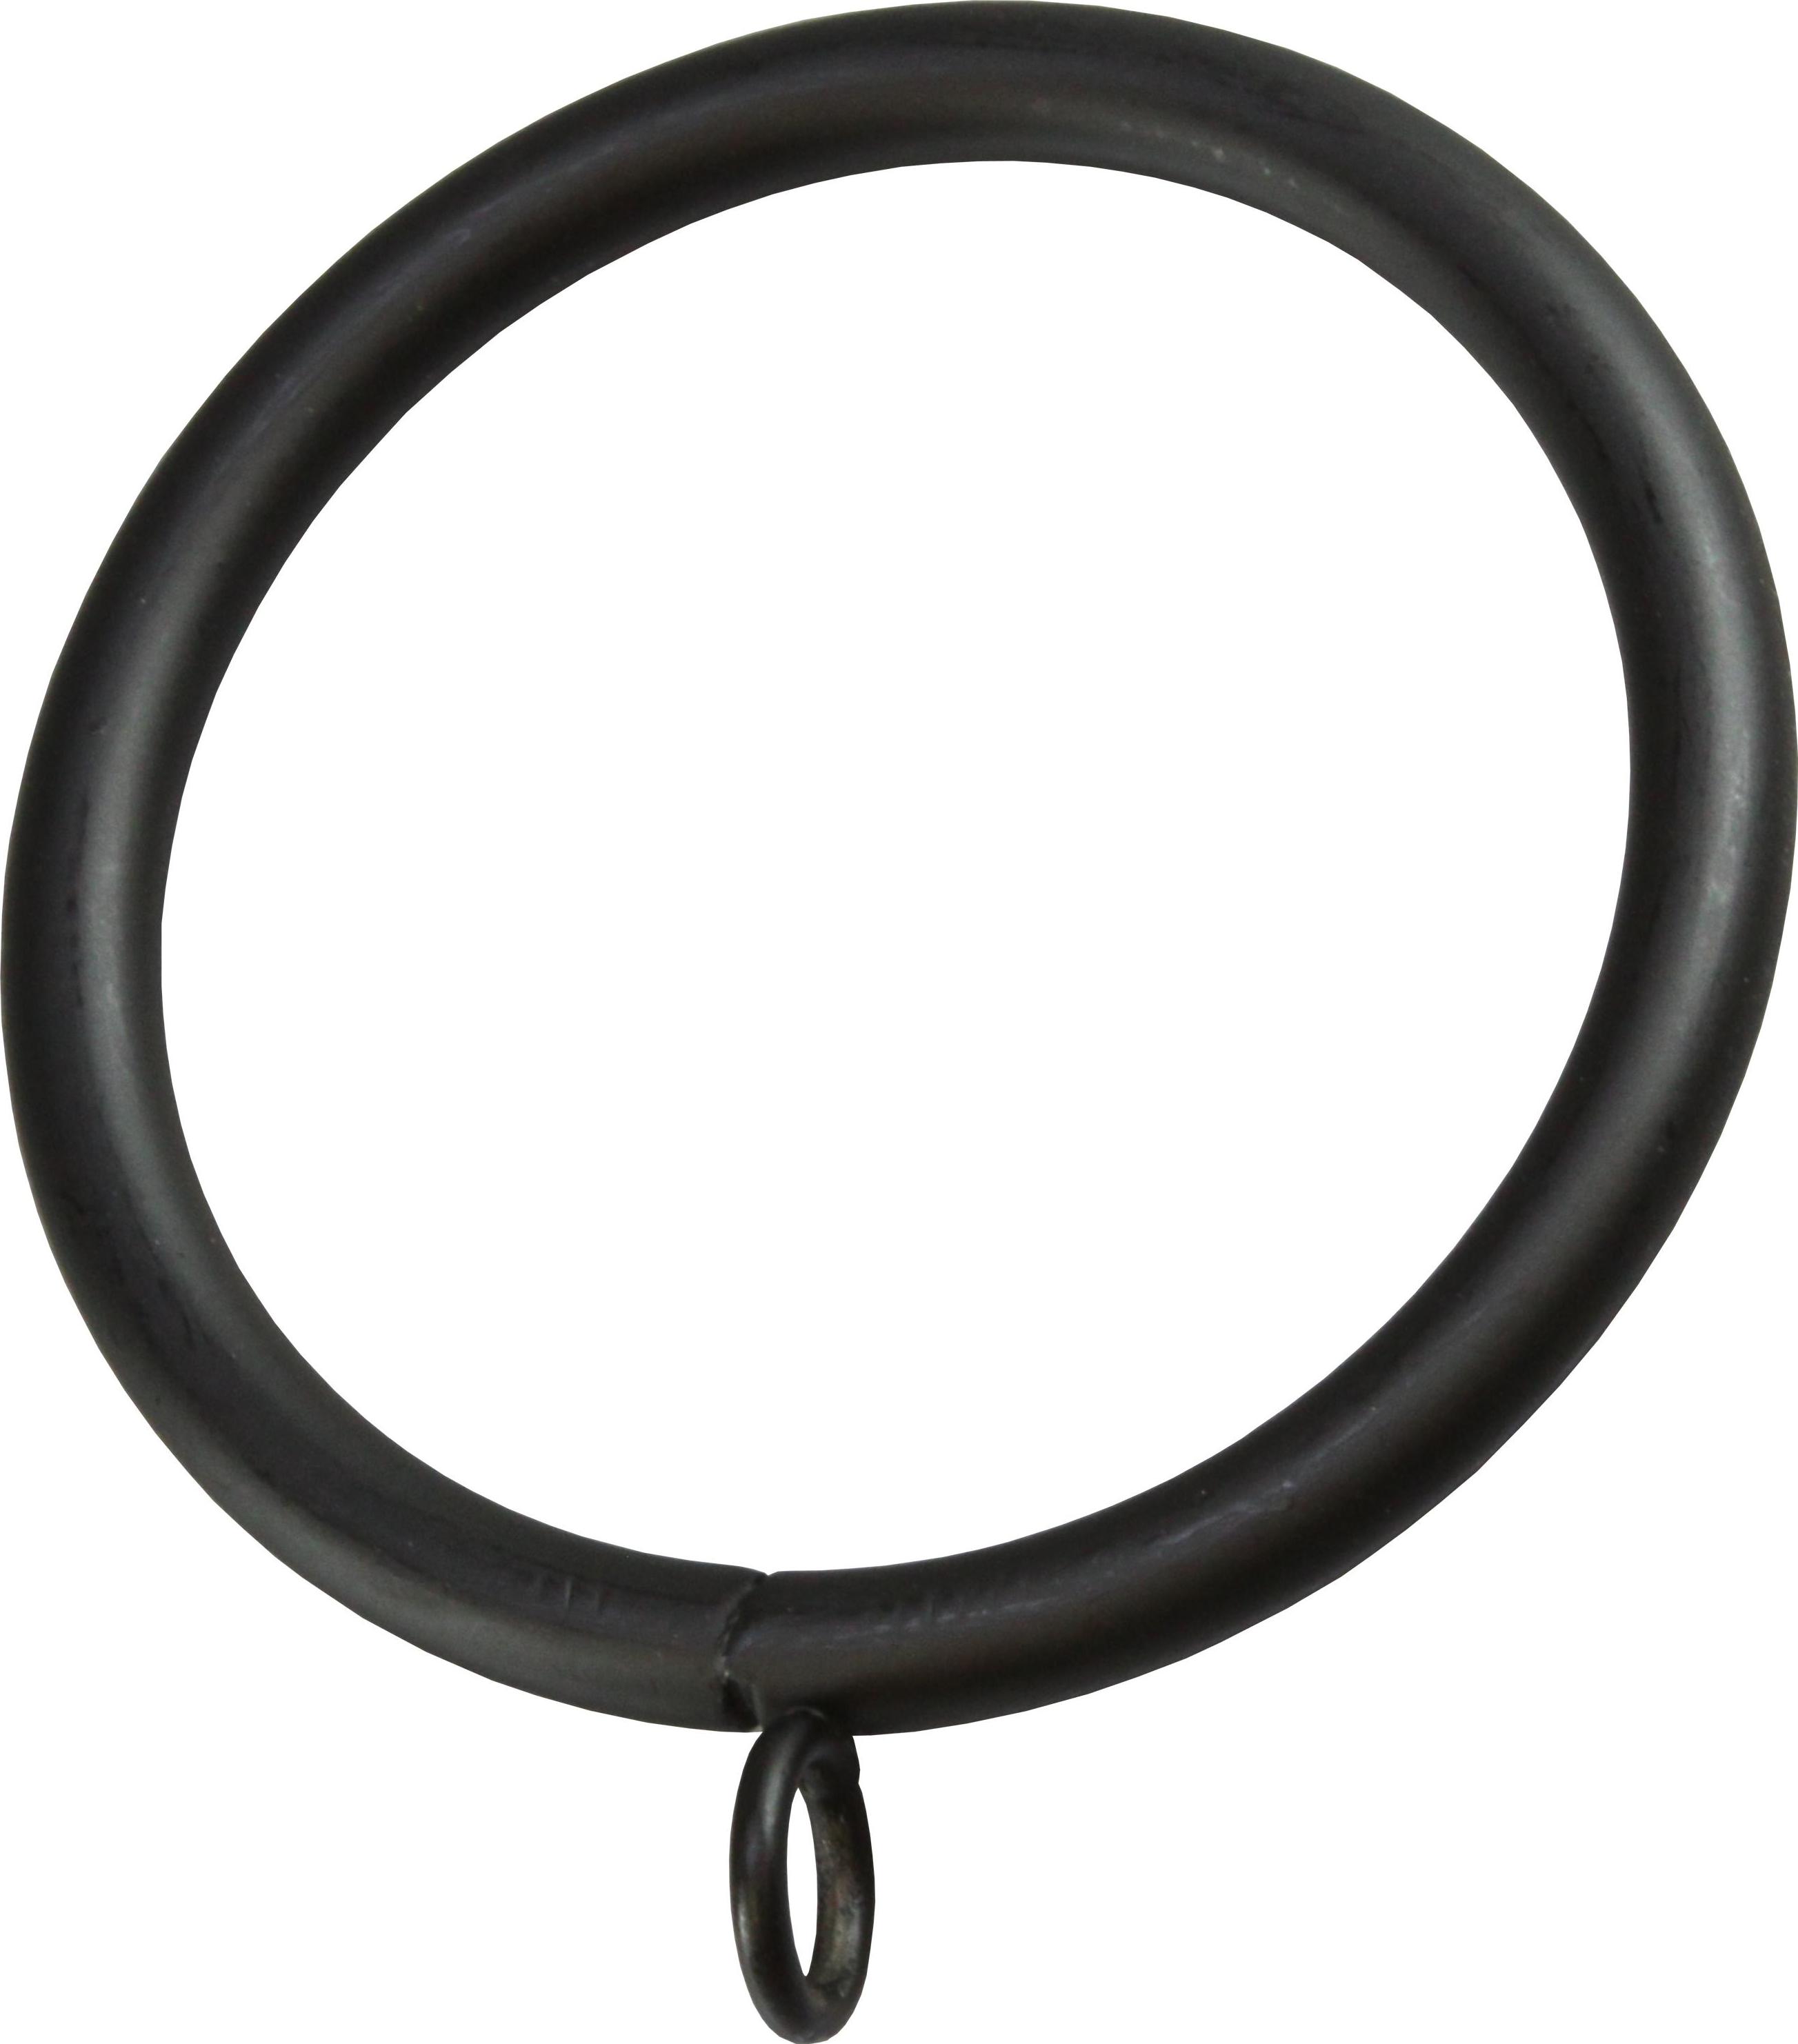 3 Inch Diameter Ring with Eyelet Curtain Rods